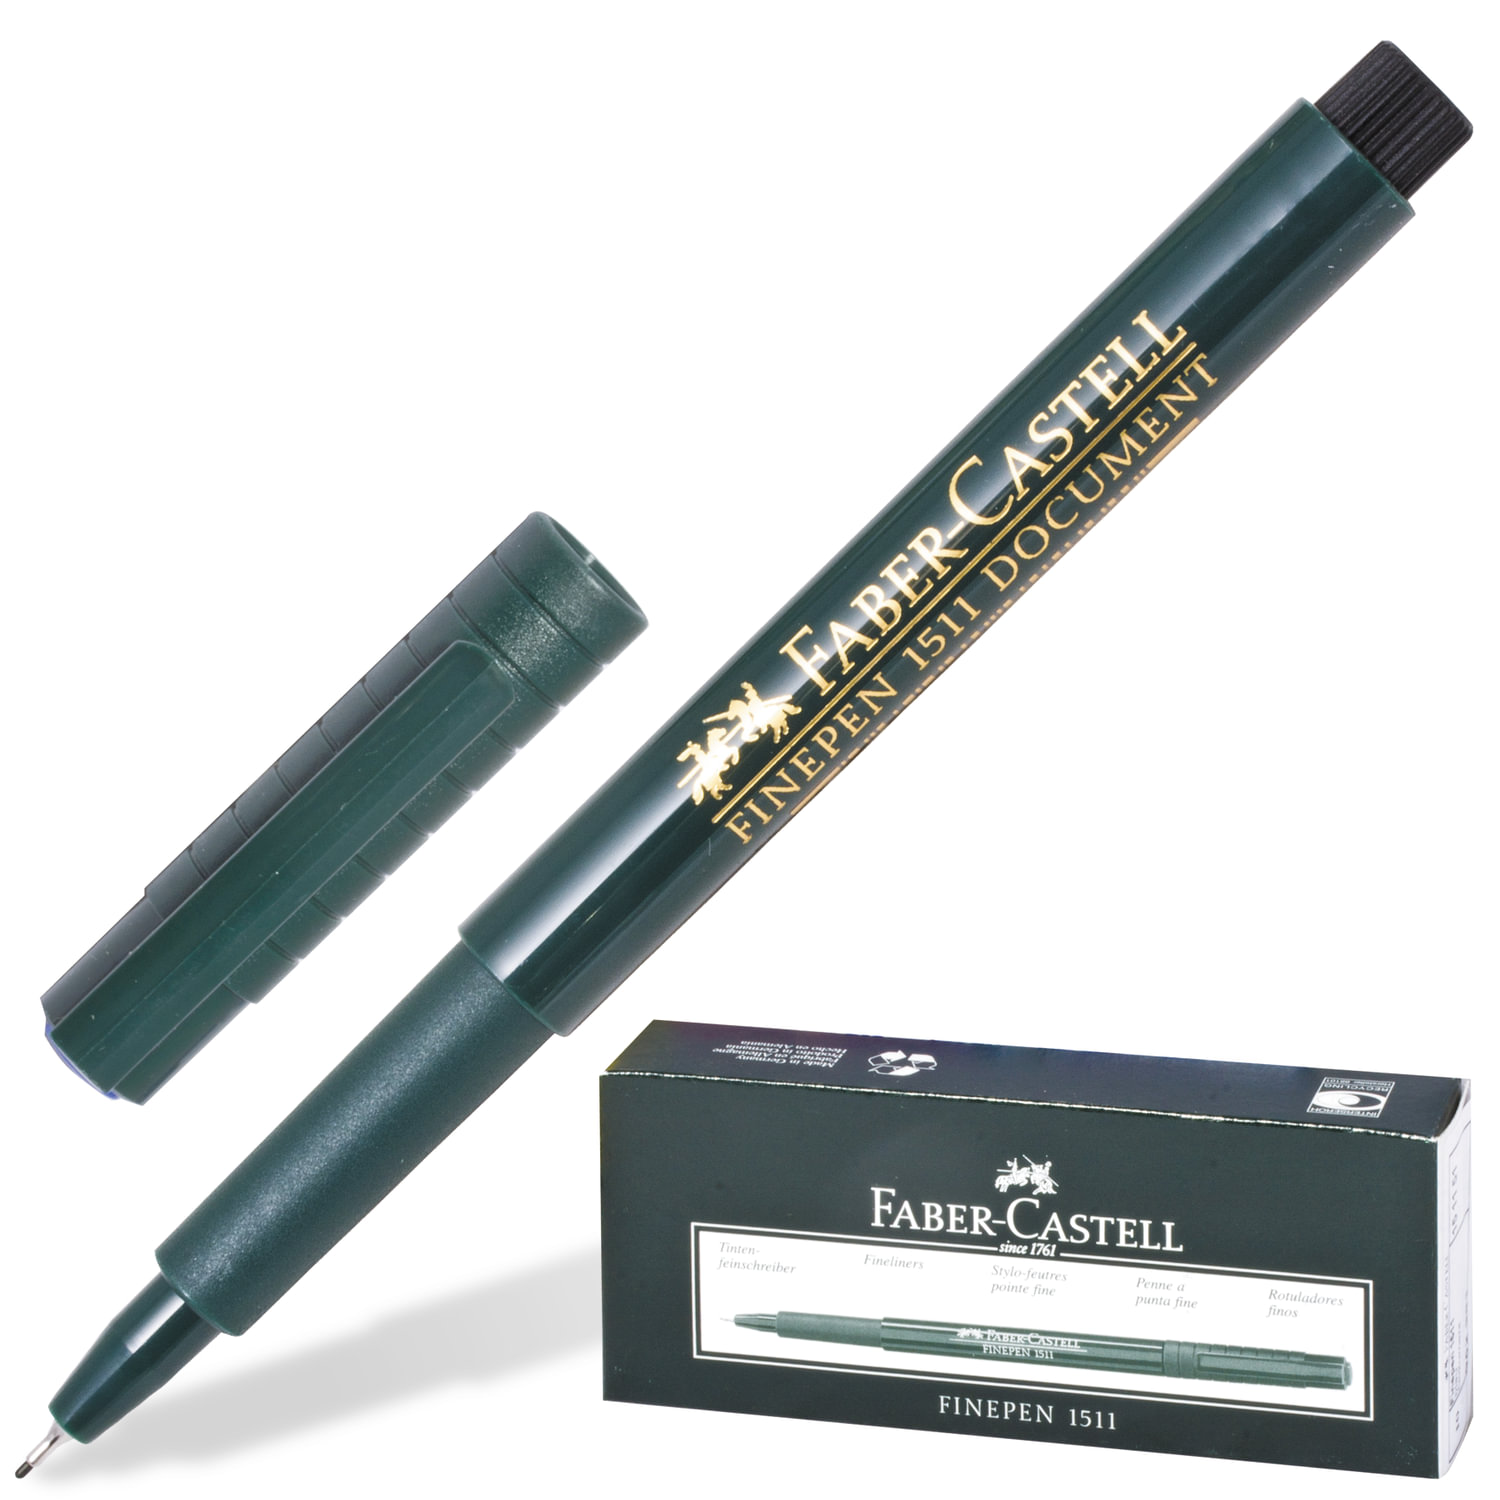  FABER-CASTELL 151199